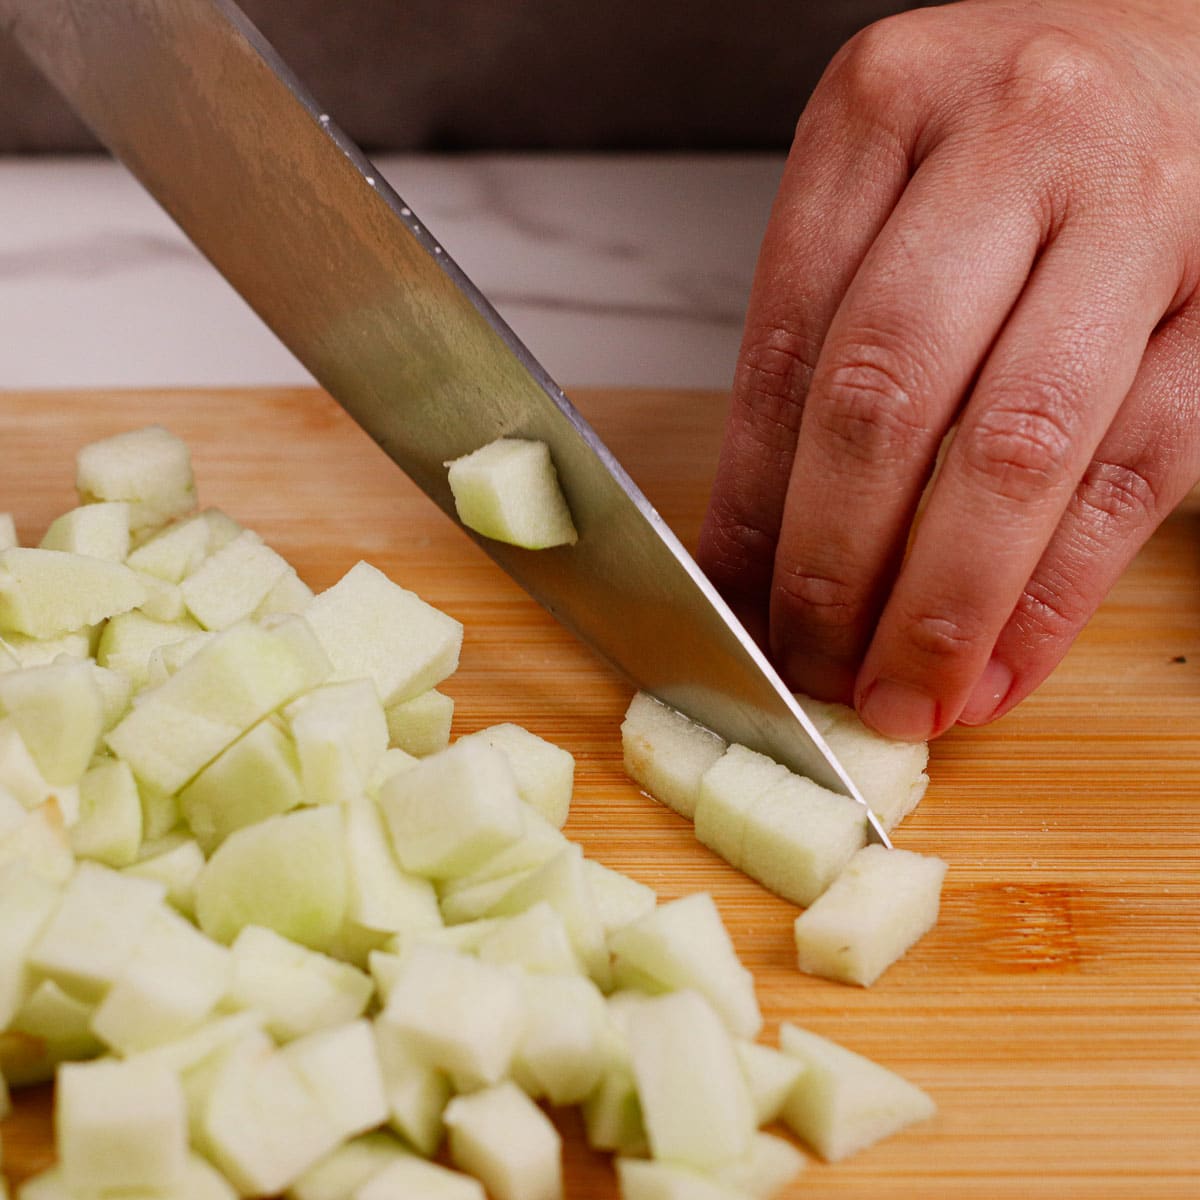 Dicing apples on chopping board